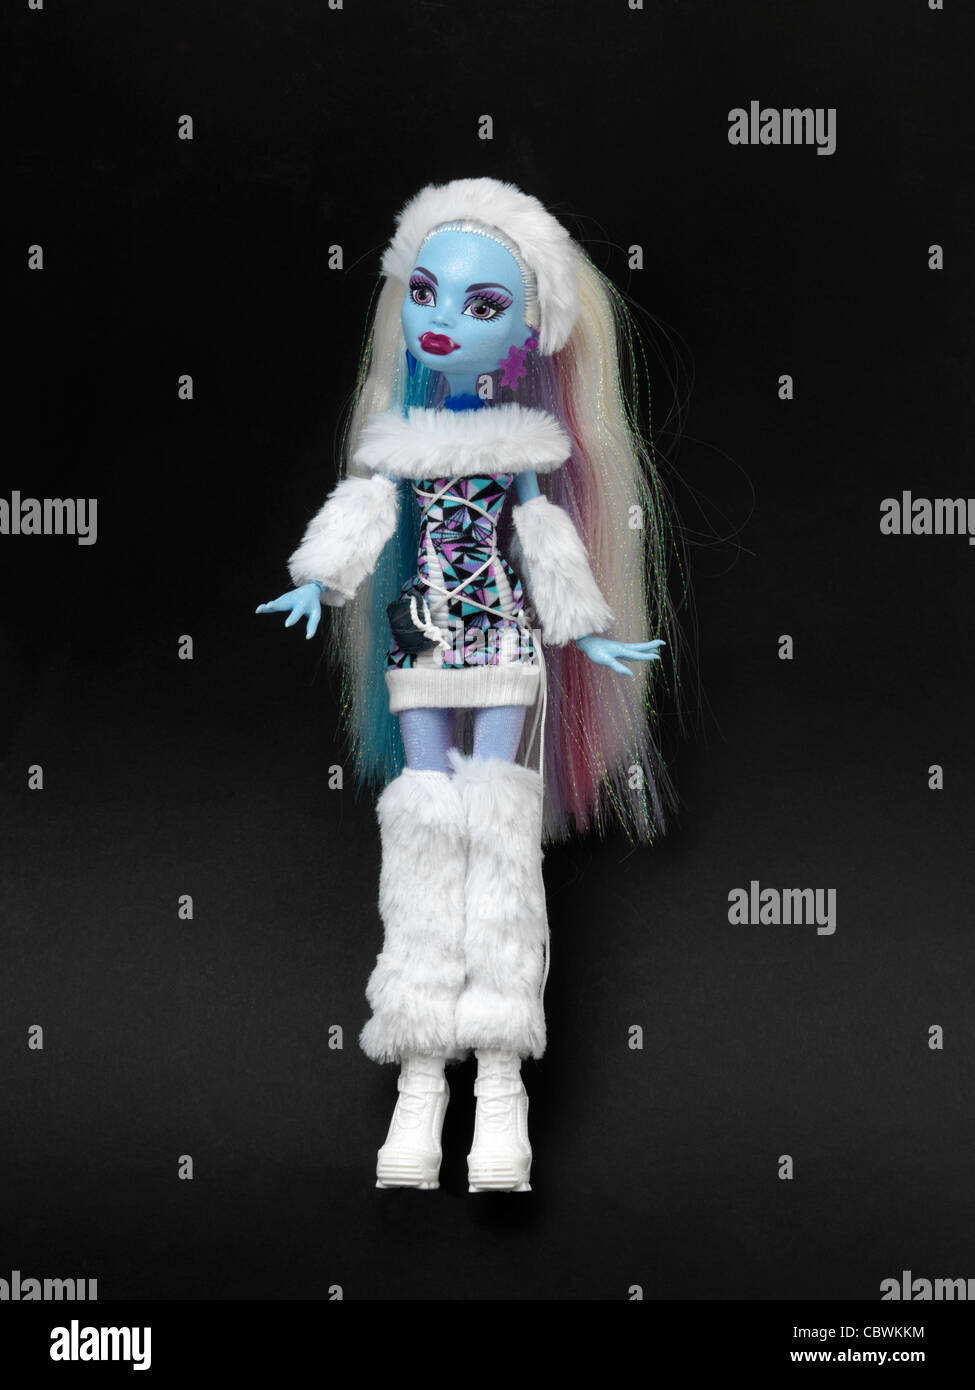 Monster High High Resolution Stock Photography and Images - Alamy